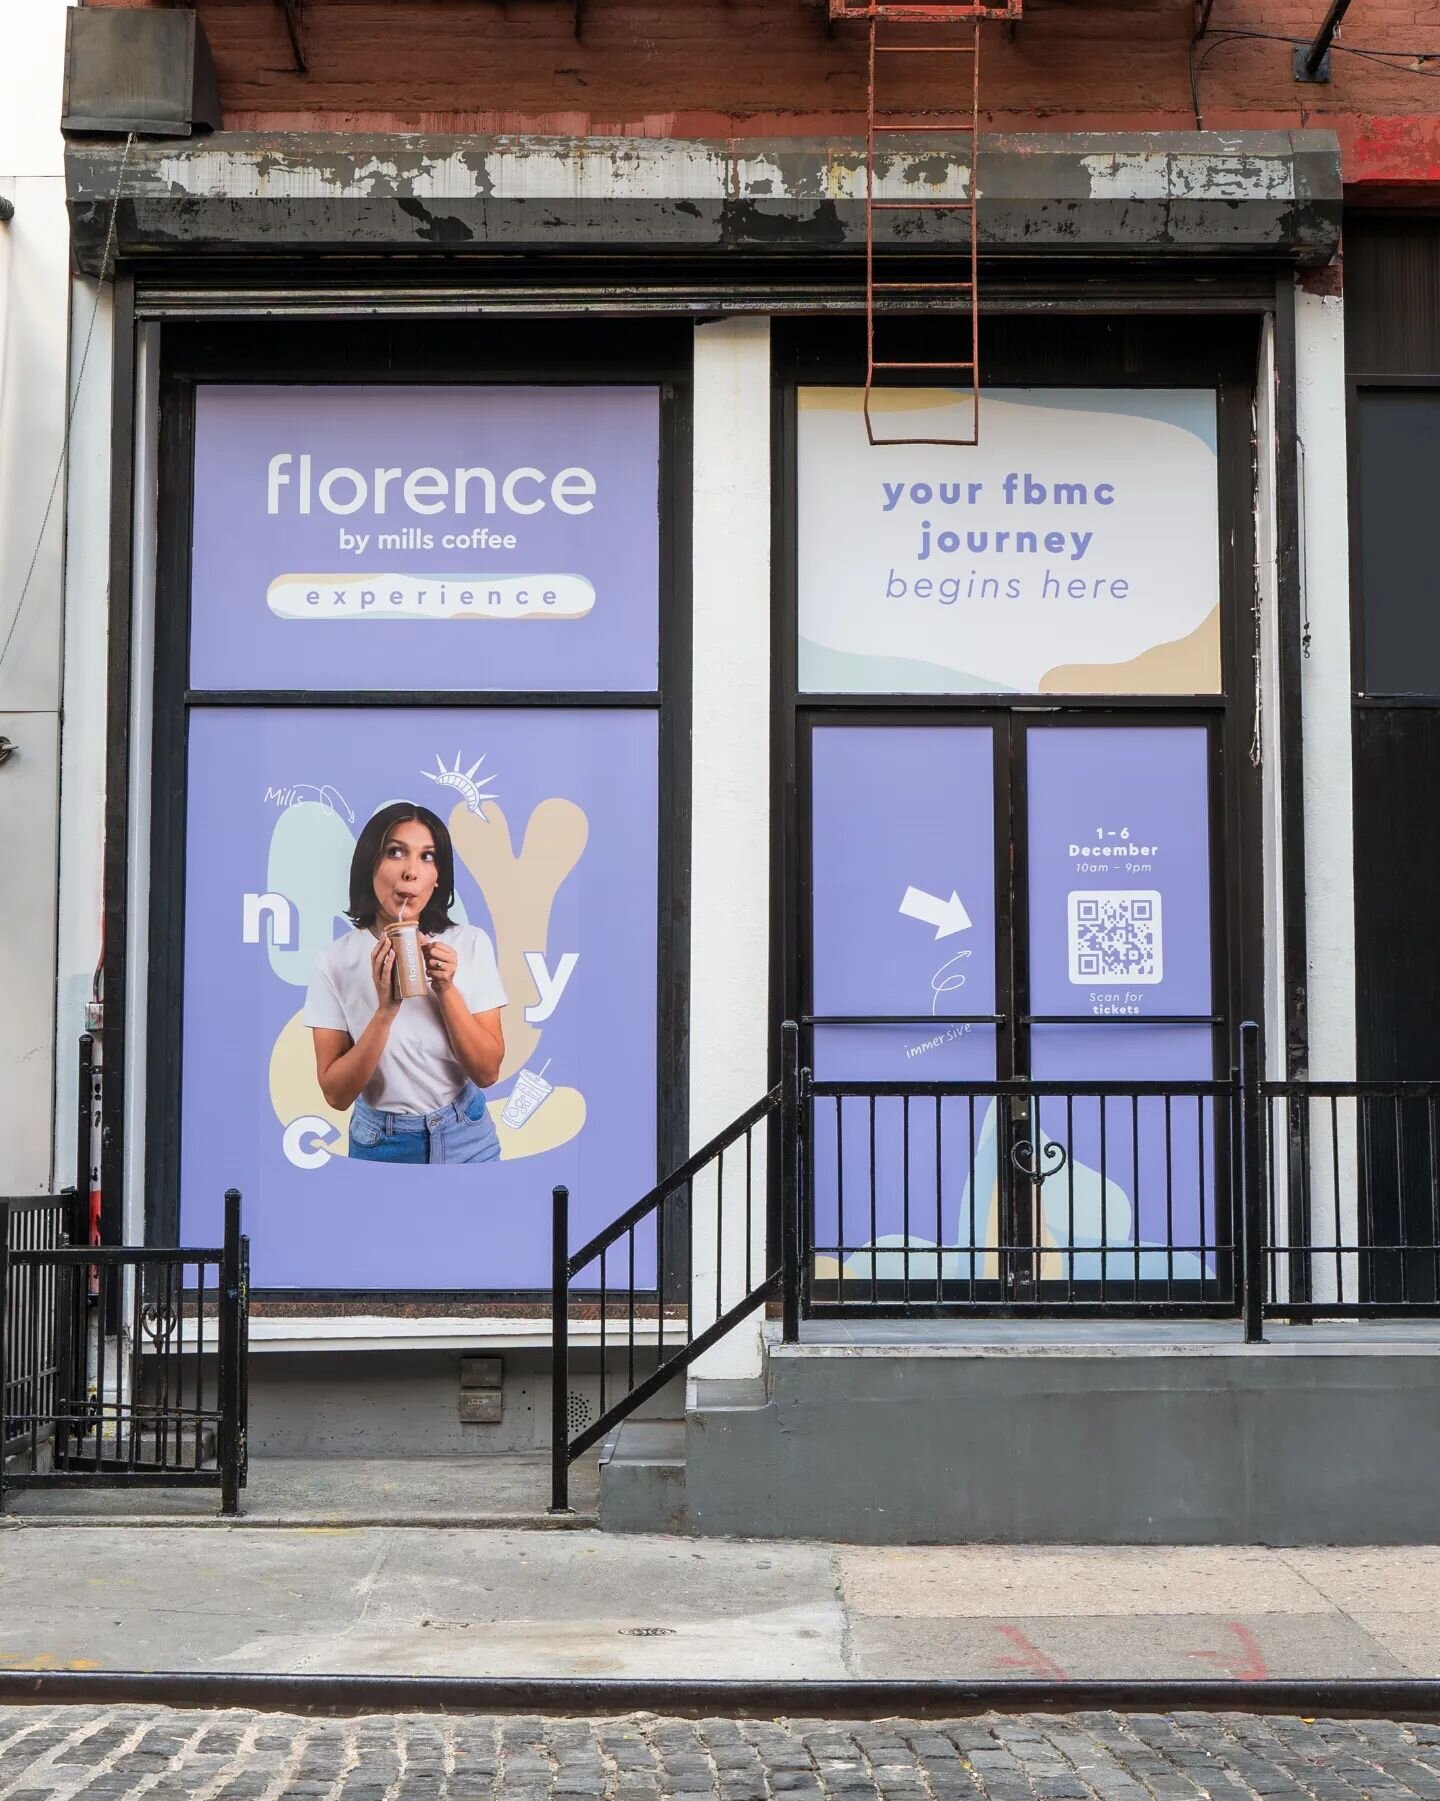 Absolutely wild seeing a shot of mine on the side of a building in NYC! 
🙌🏼💜☕ For the @florencebymillscoffee immersive event this past week. #fbmcNYC 

Amazing work from the @collabcoffee_ creative team not only for helping create the photoshoot b